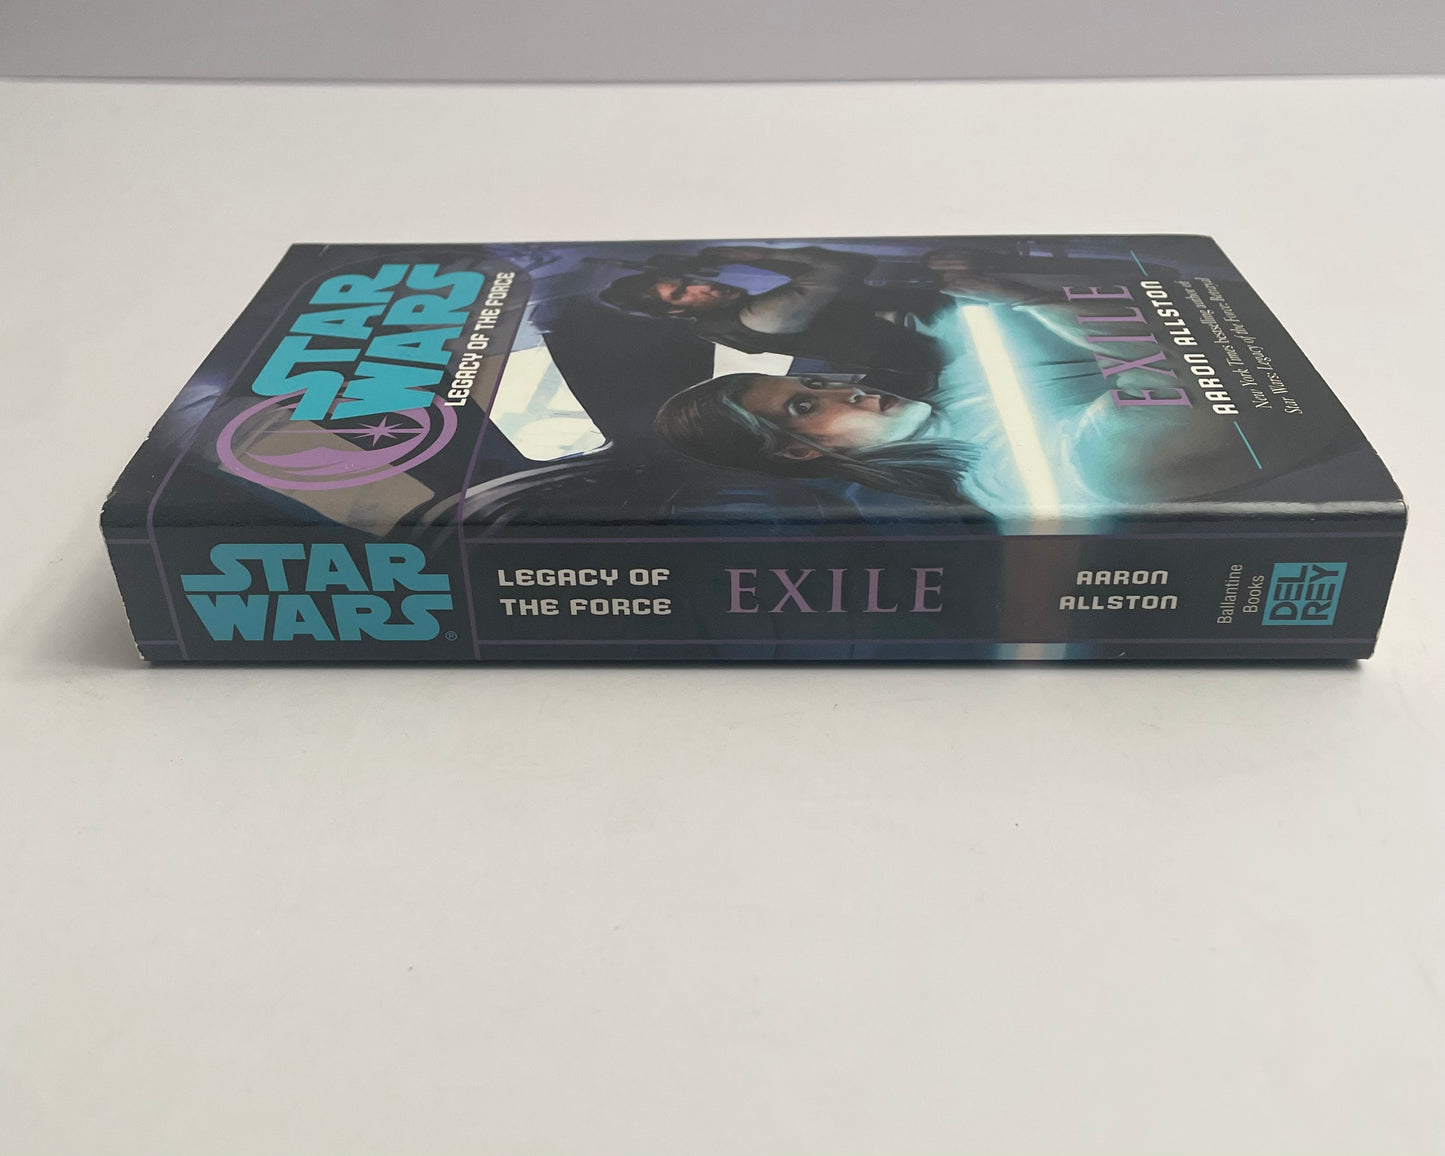 Star Wars Legacy Of The Force: Exile